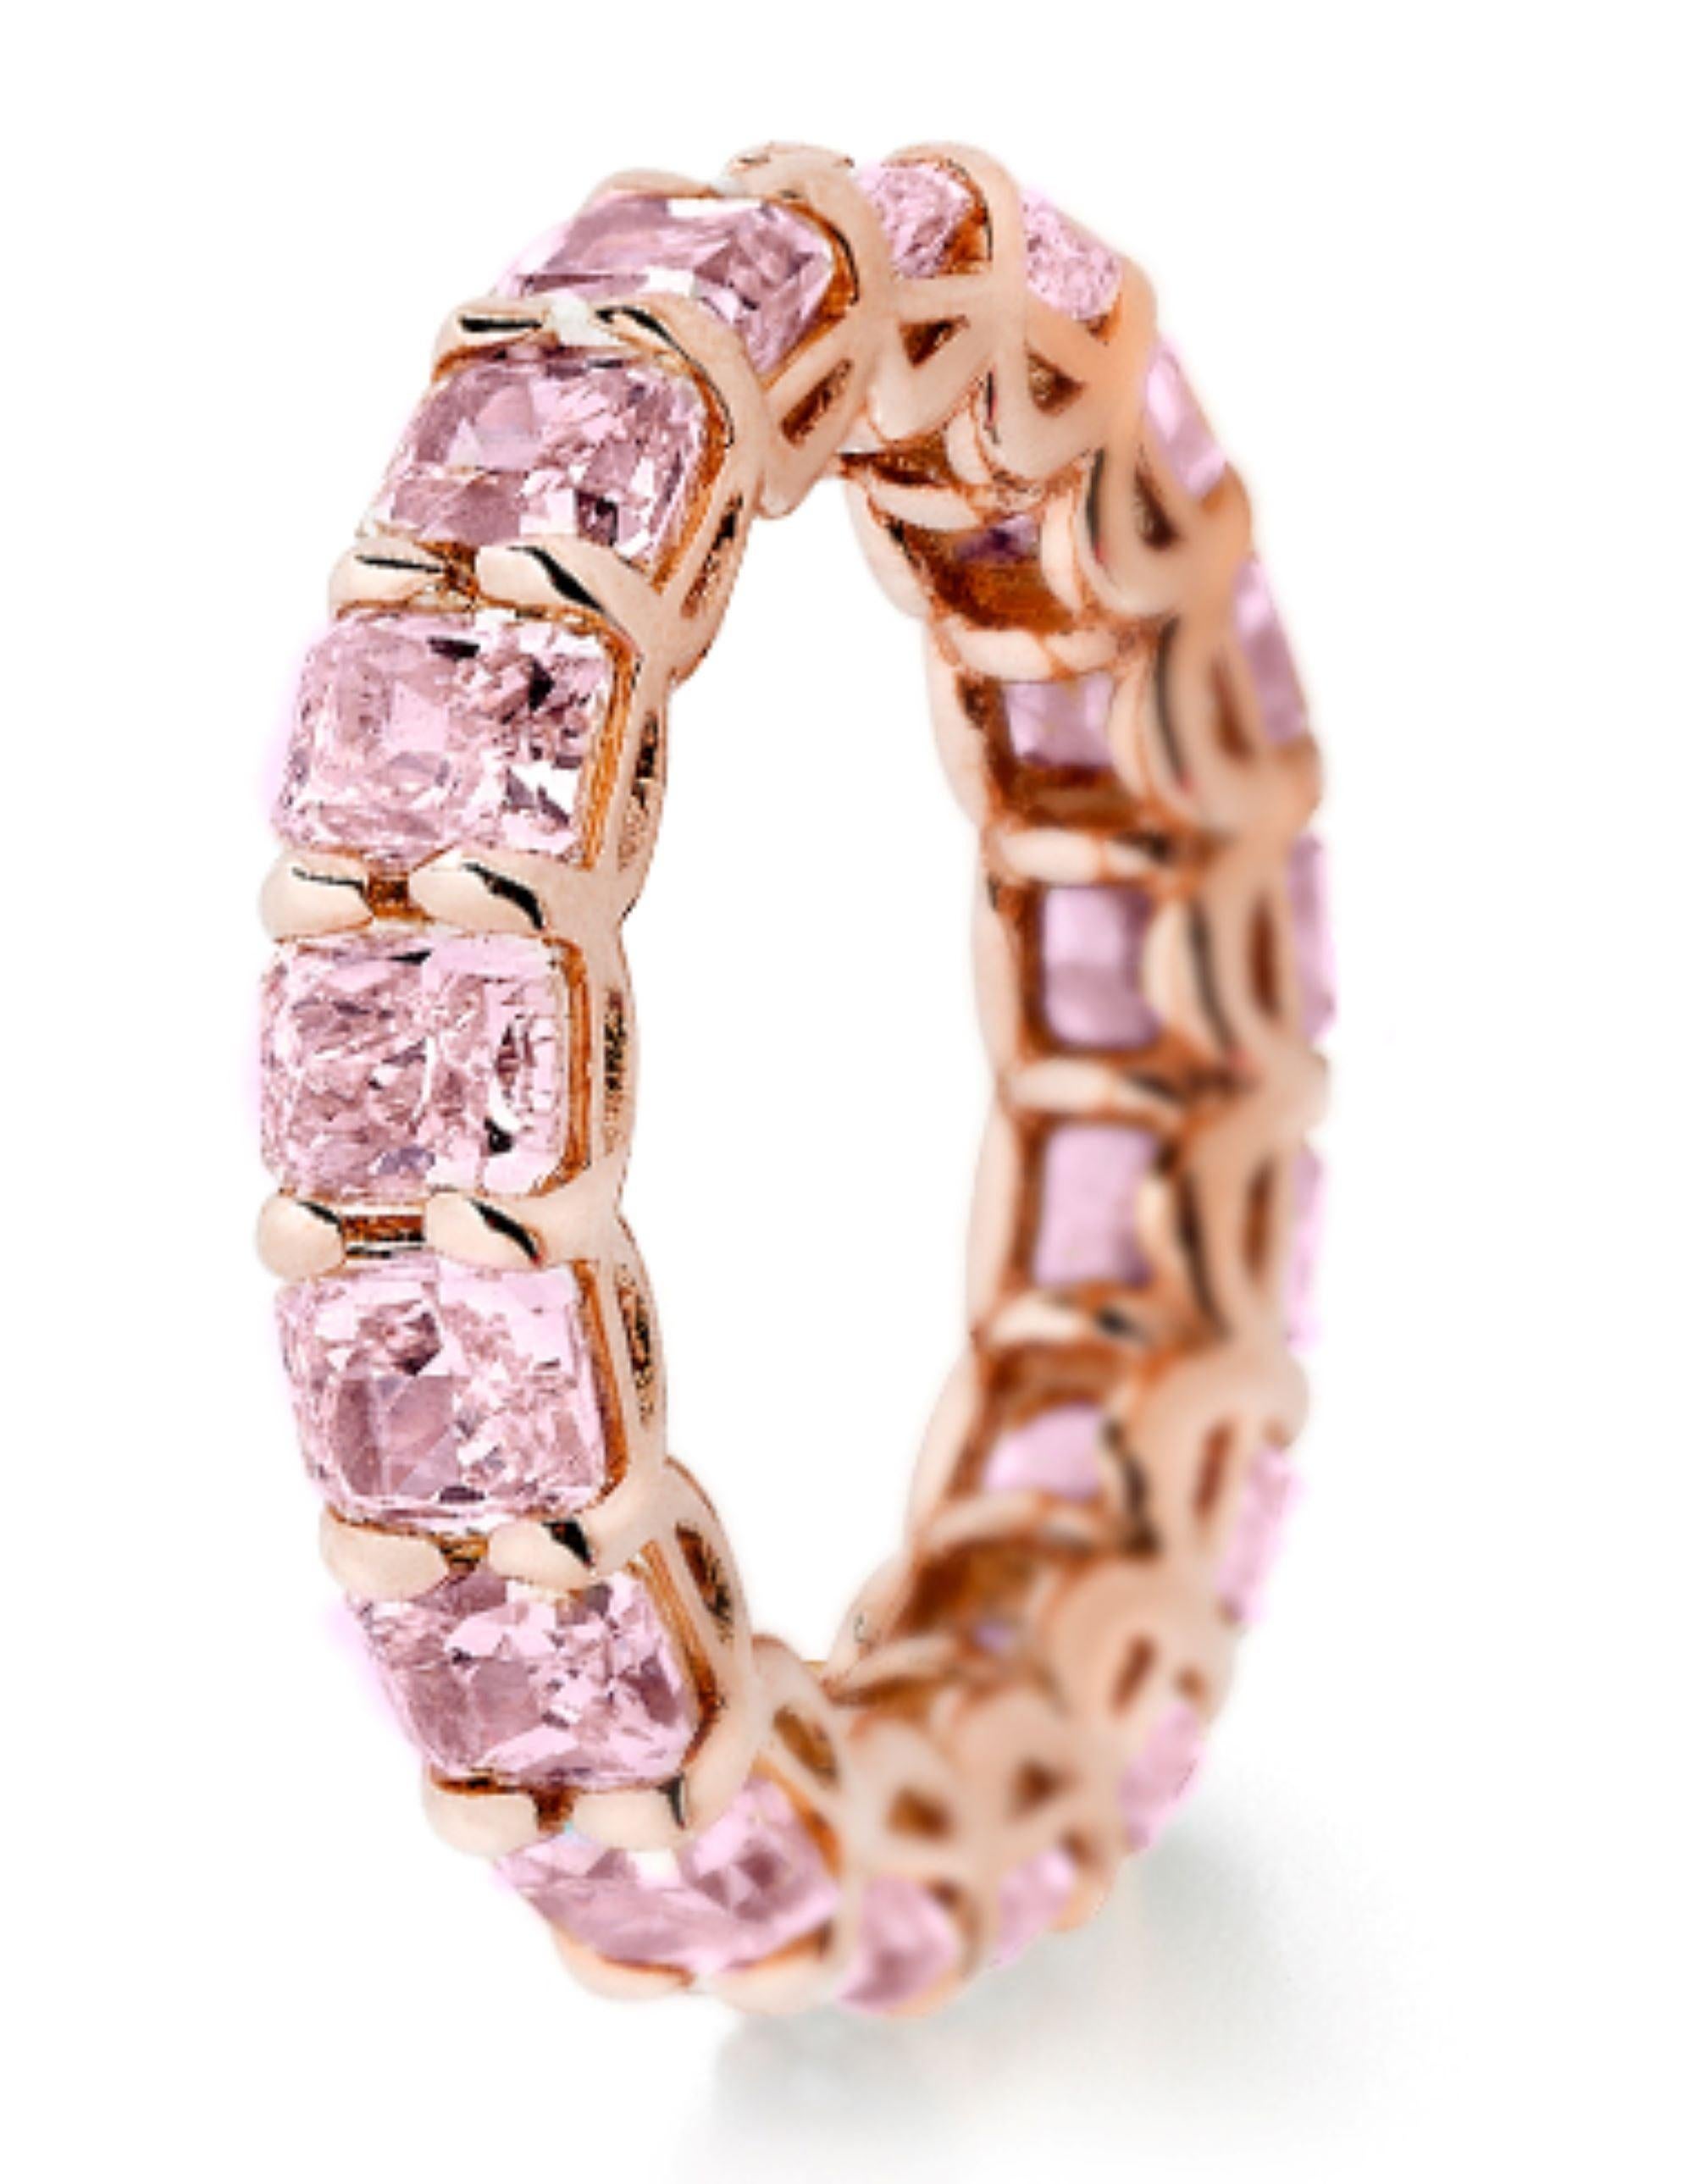 Women's or Men's 5.20 Carat Radiant Cut Pink Diamond Eternity Band Ring, GIA Certified For Sale